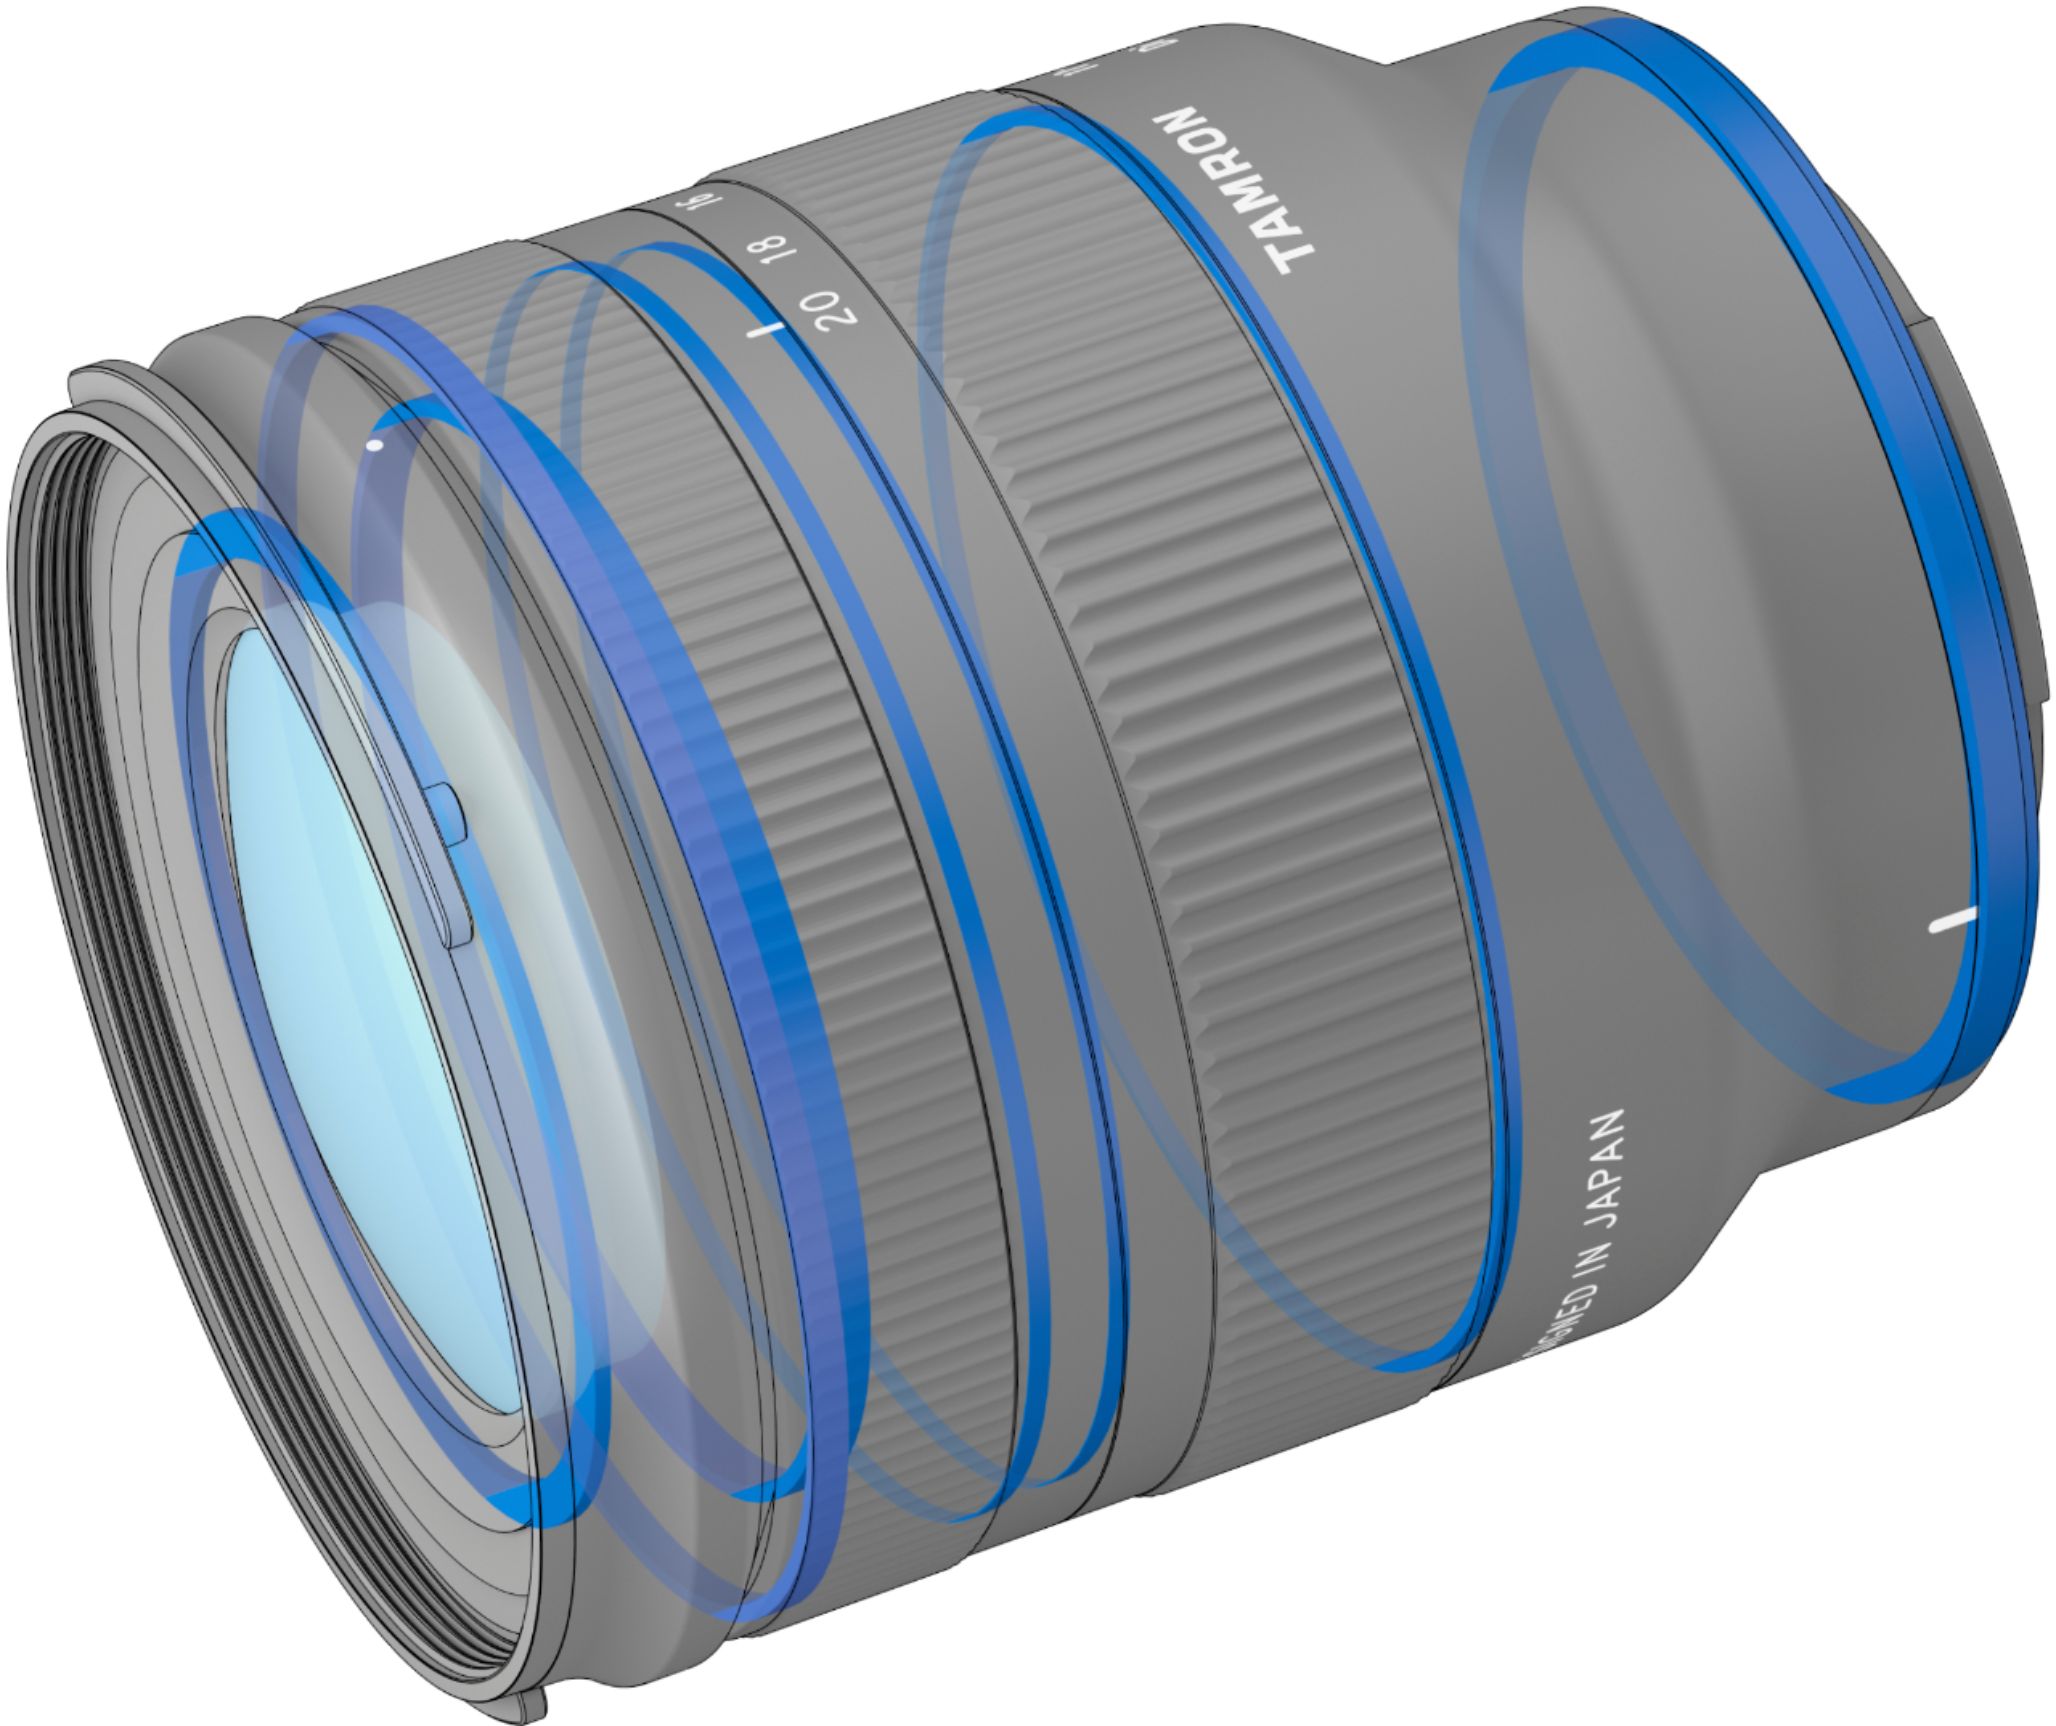 Tamron 11-20mm F/2.8 Di III-A RXD Wideangle Zoom Lens for Sony E-Mount  AFB060S700 - Best Buy